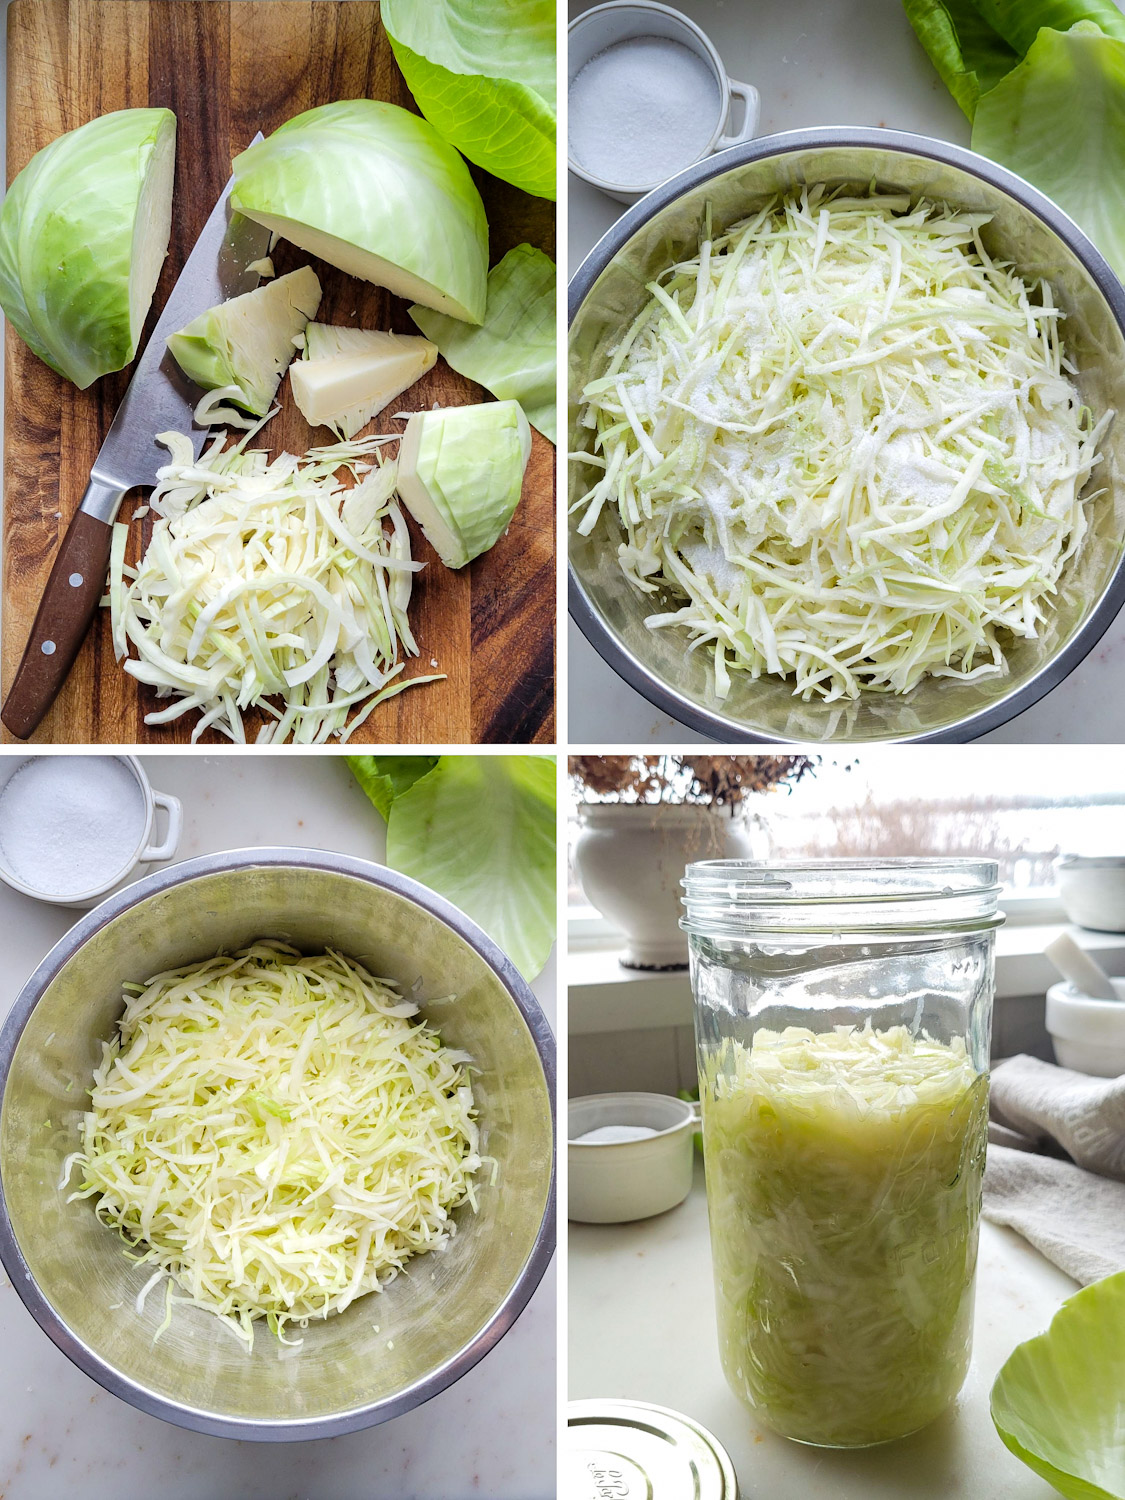 Collage showing how to prepare Cabbage for Sauerkraut.